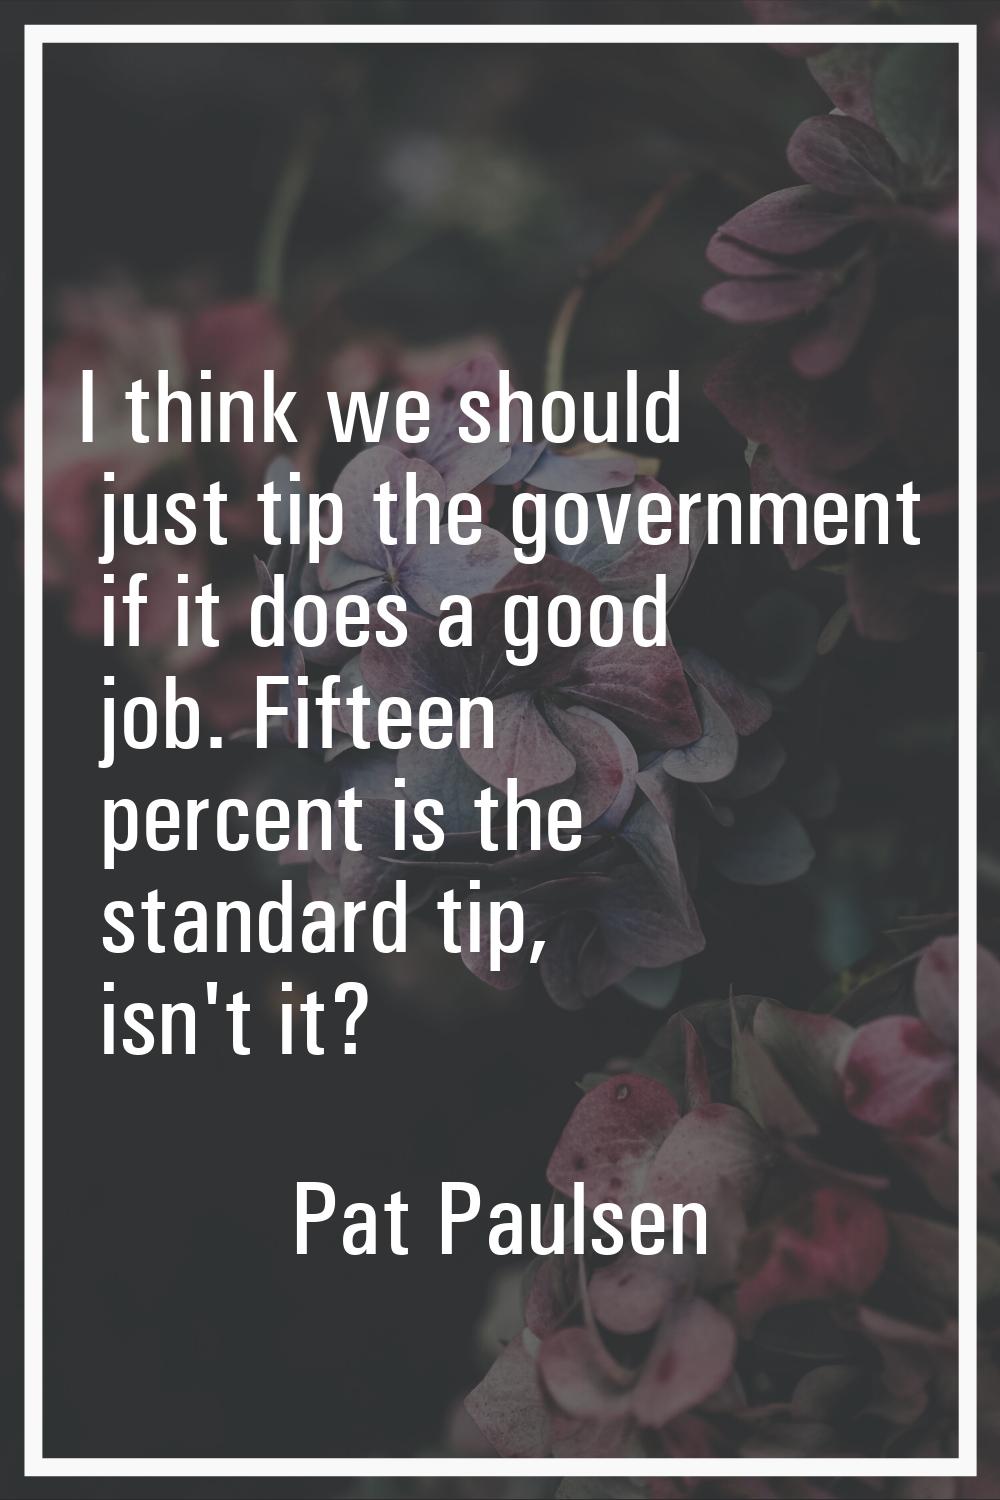 I think we should just tip the government if it does a good job. Fifteen percent is the standard ti